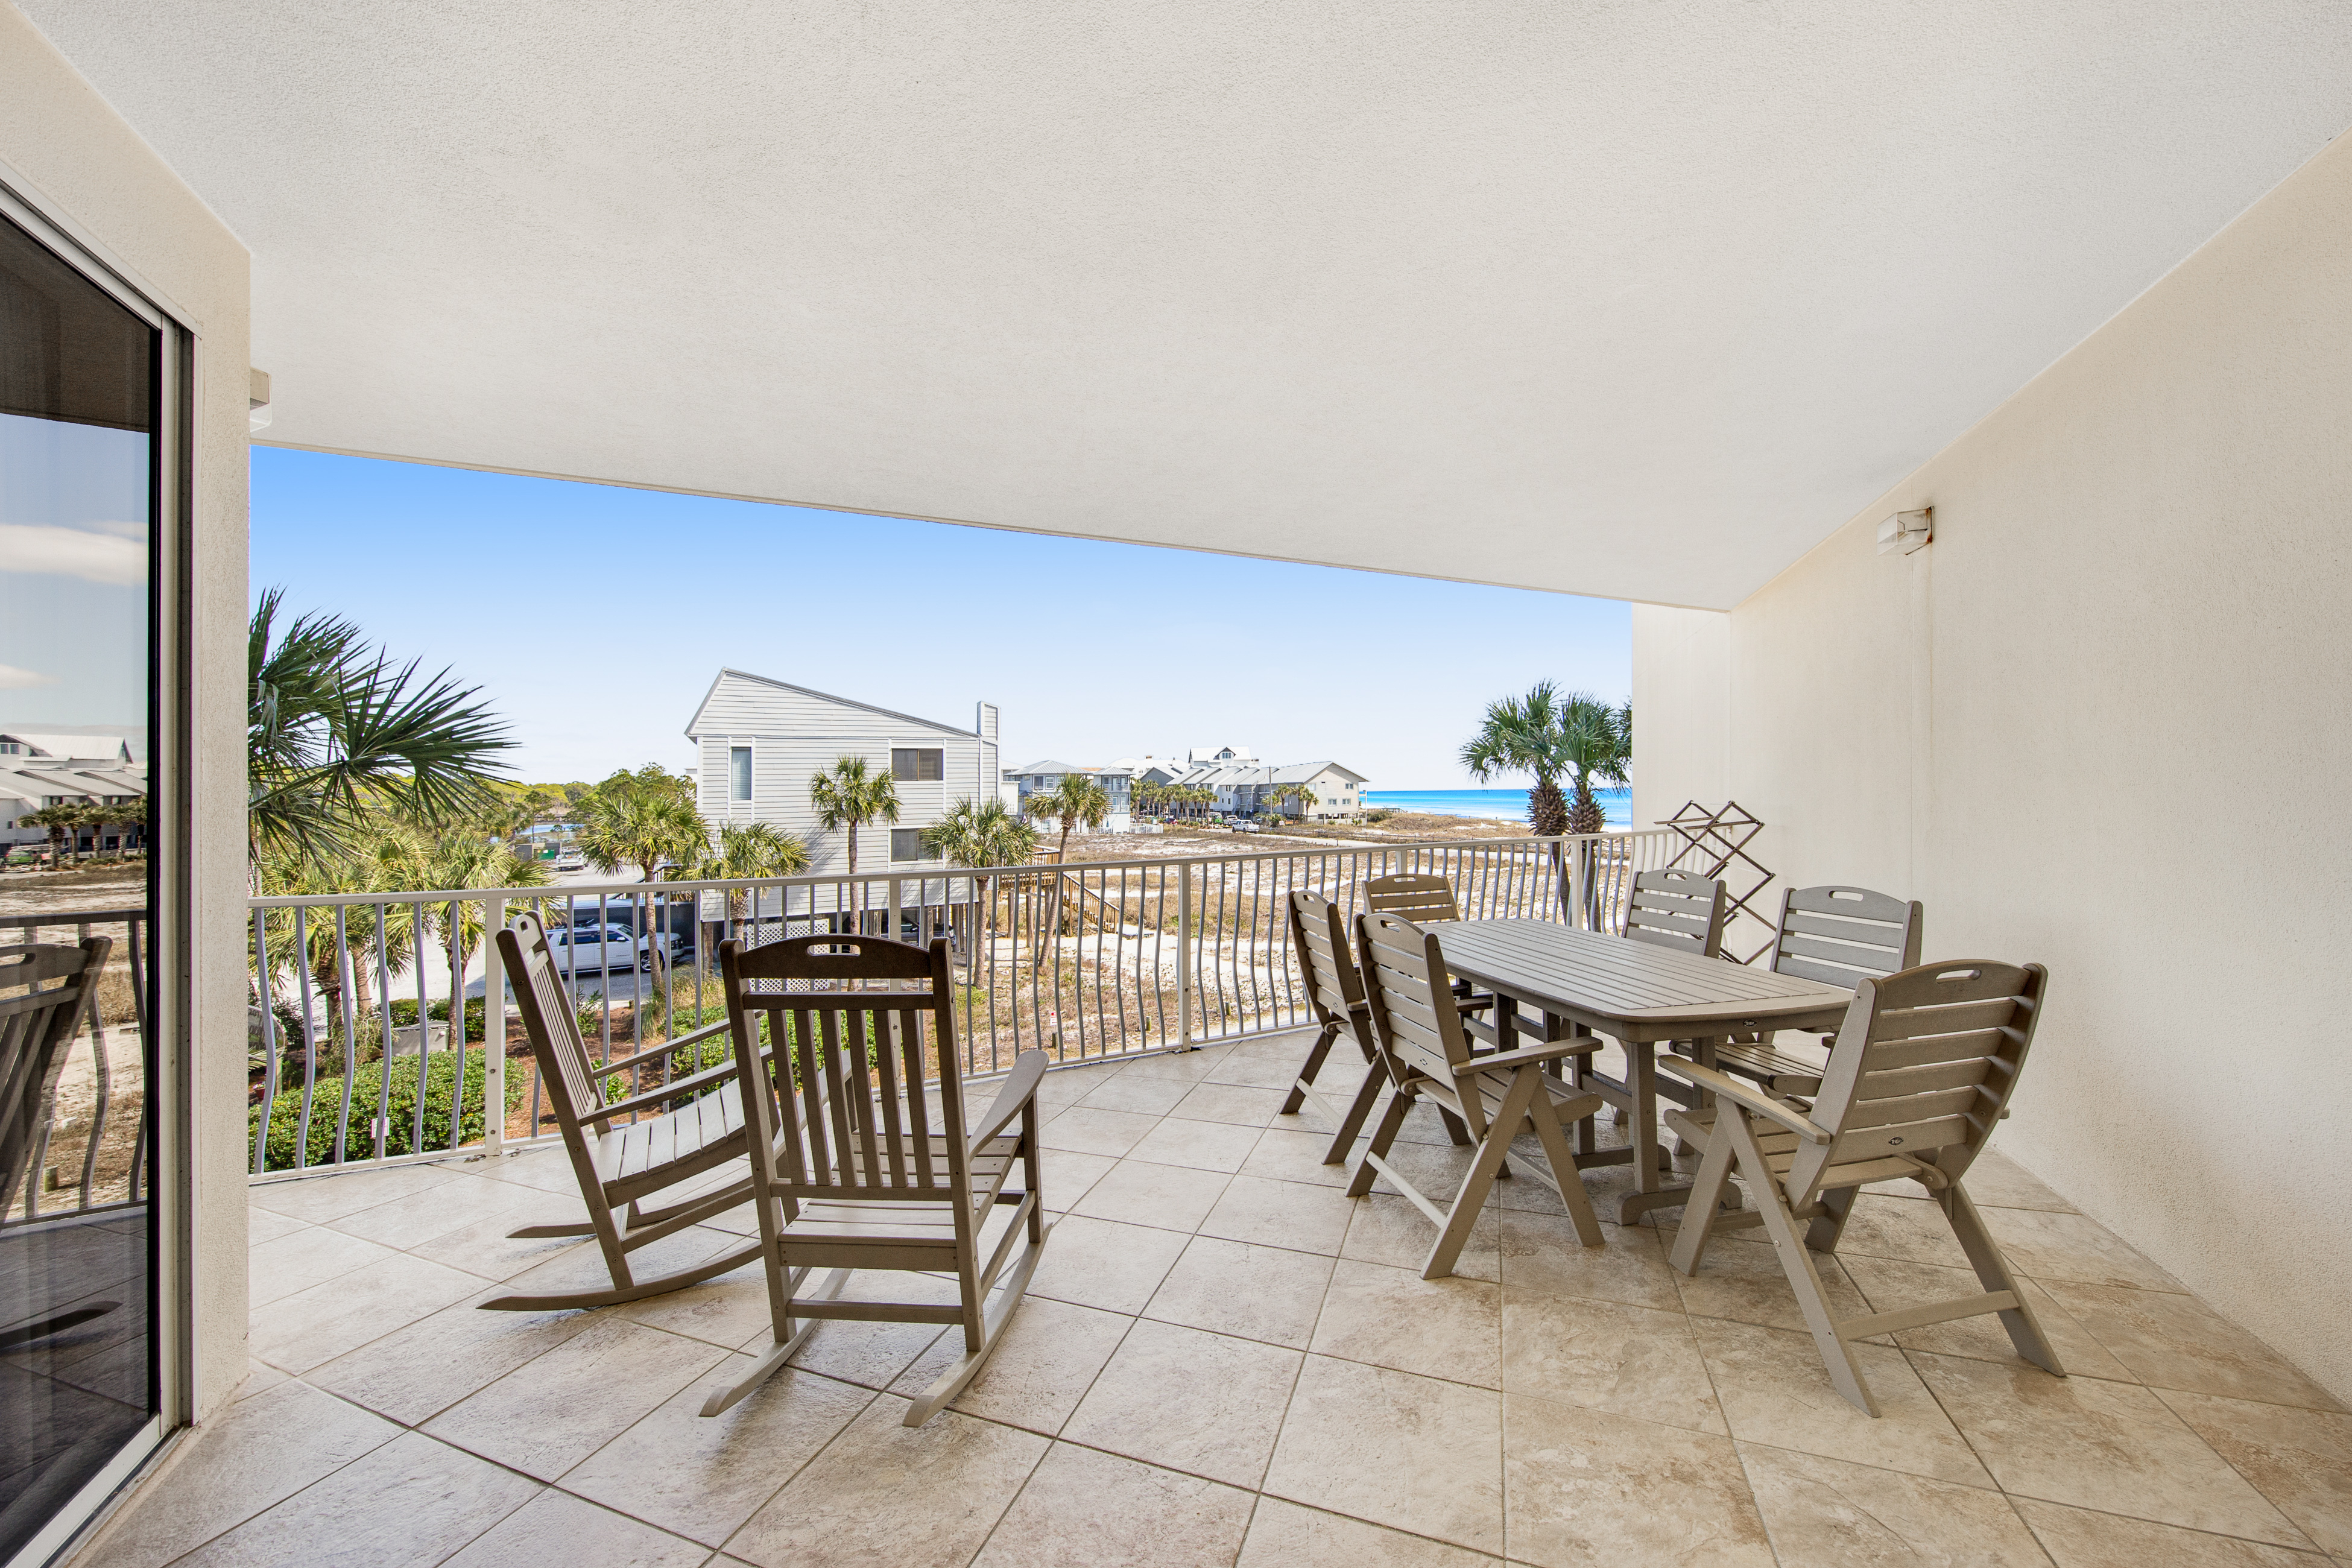 Dunes of Seagrove A205 Condo rental in Dunes of Seagrove in Highway 30-A Florida - #10